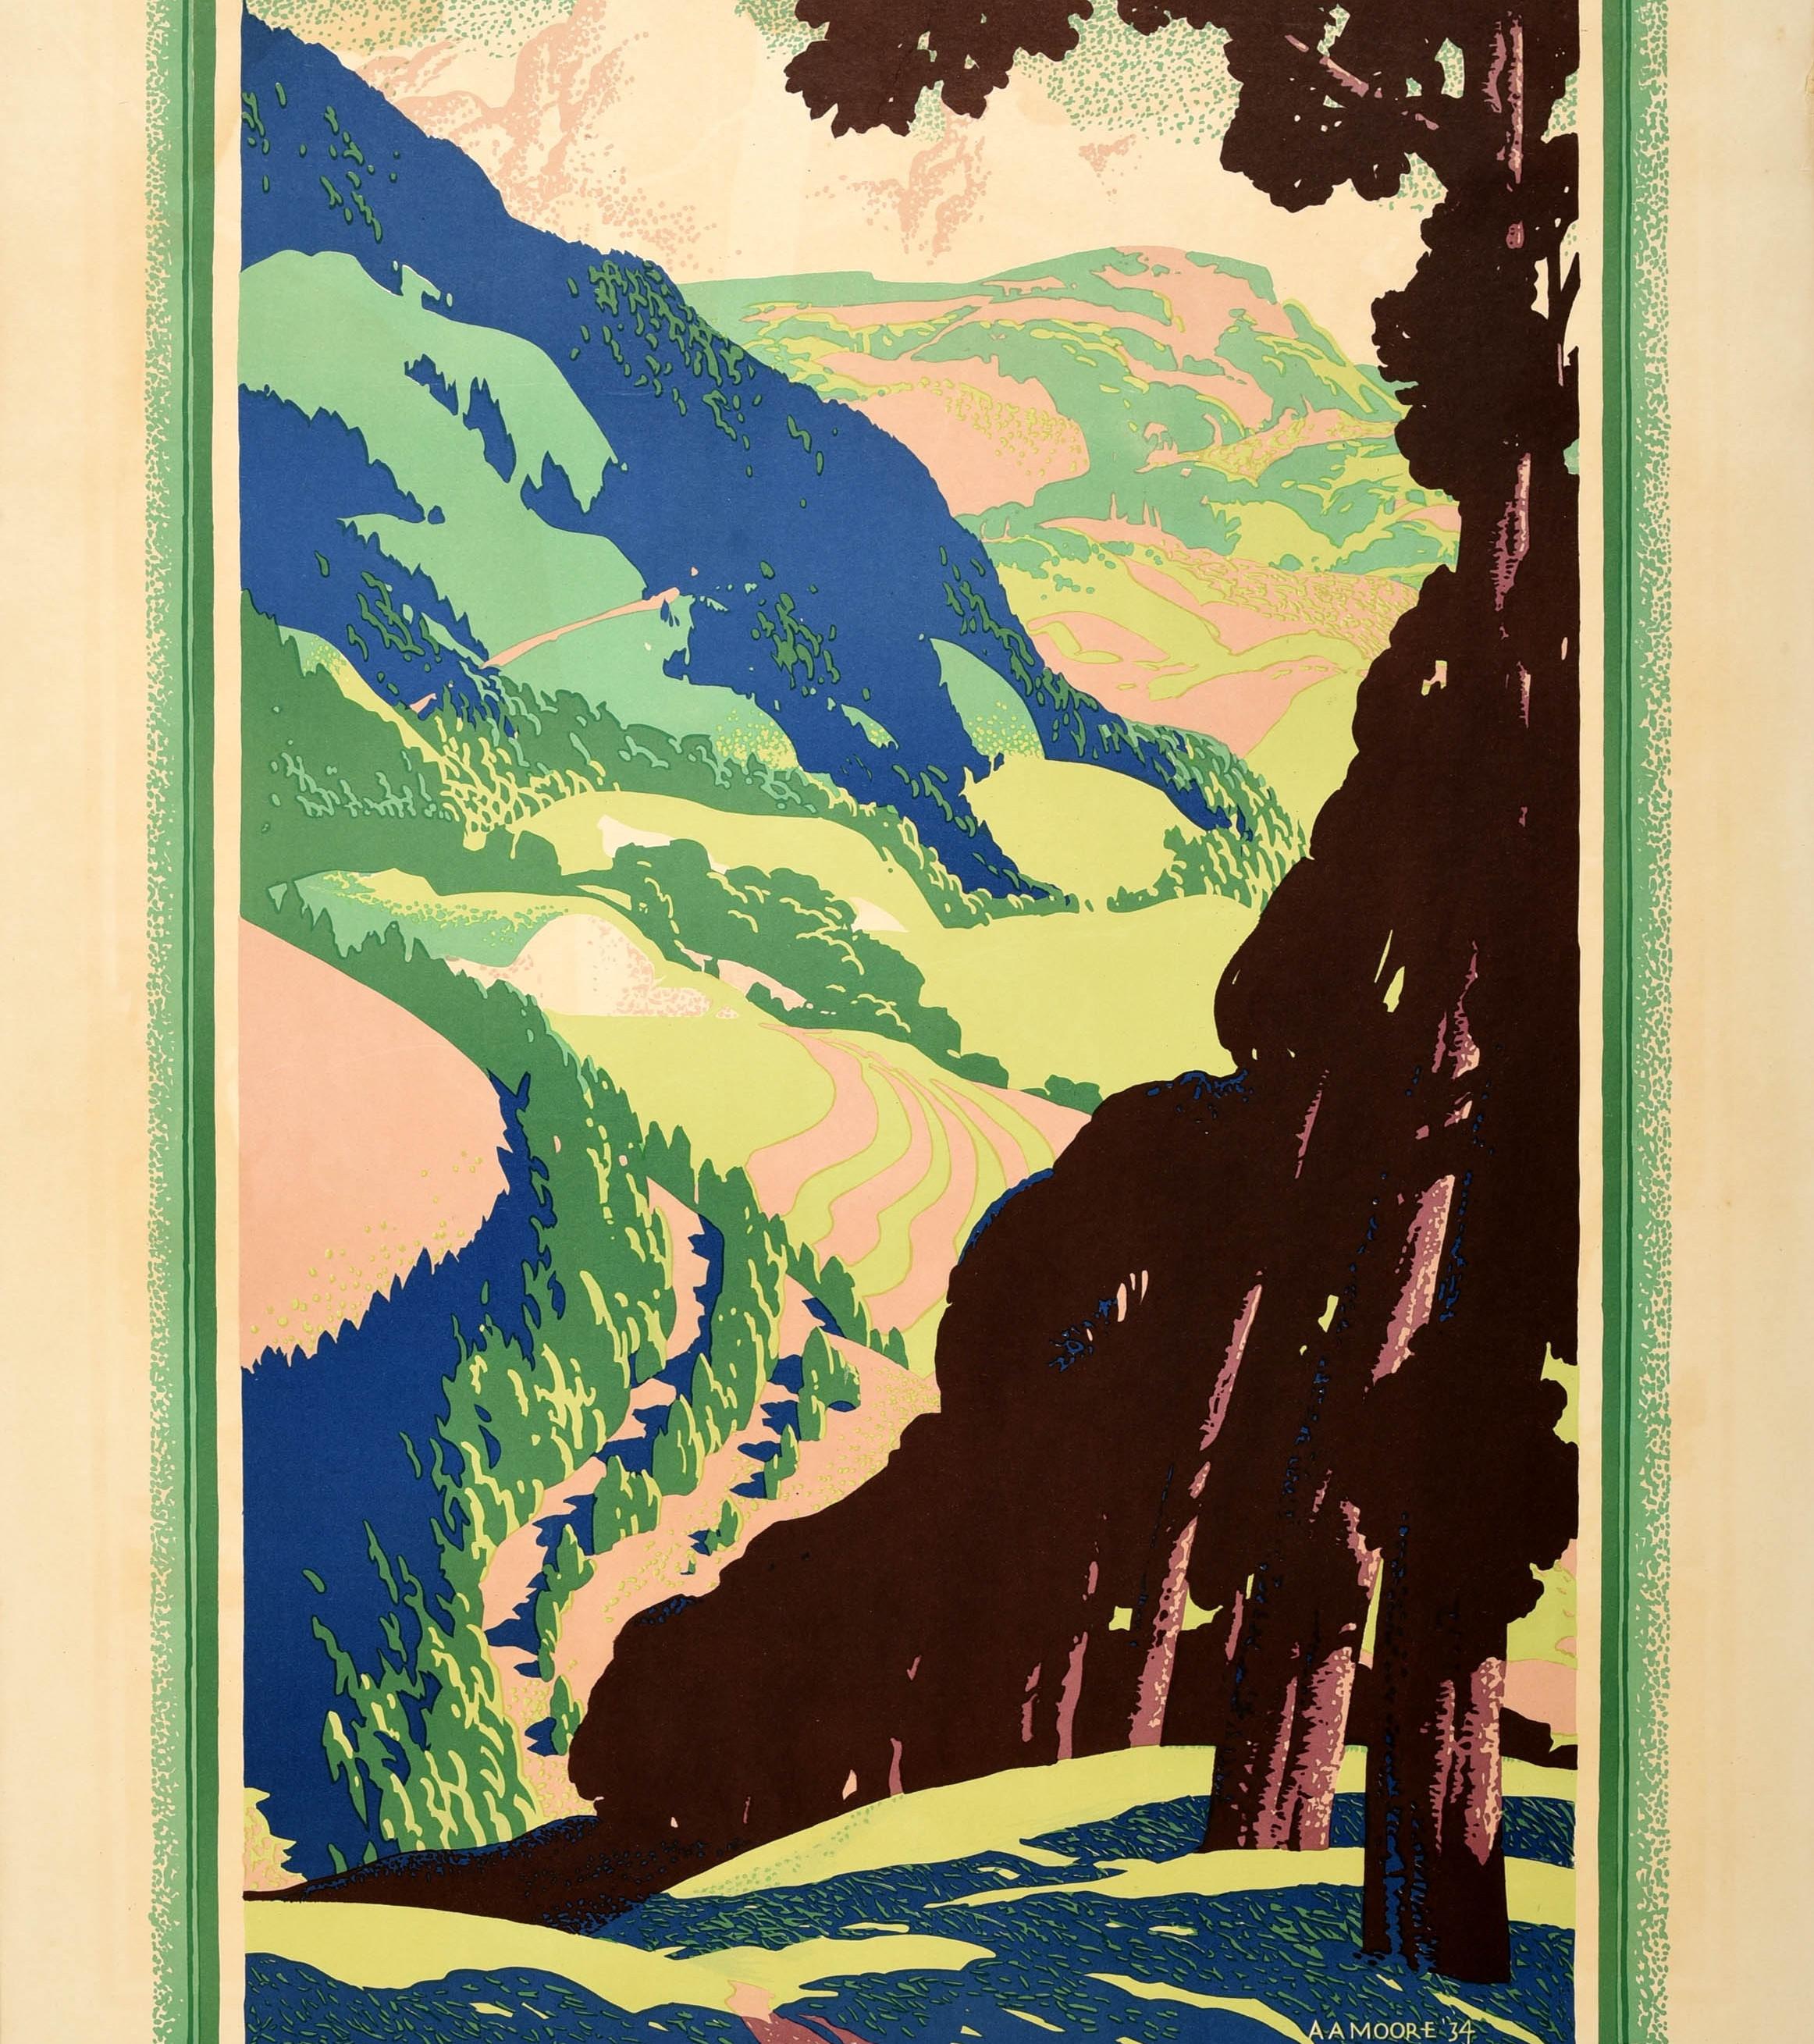 Original vintage London Transport travel poster - At London's Service - featuring a scenic countryside view of trees and fields with woods and forests on the hills in the distance set within a green shaded border on the sides, the bold stylised